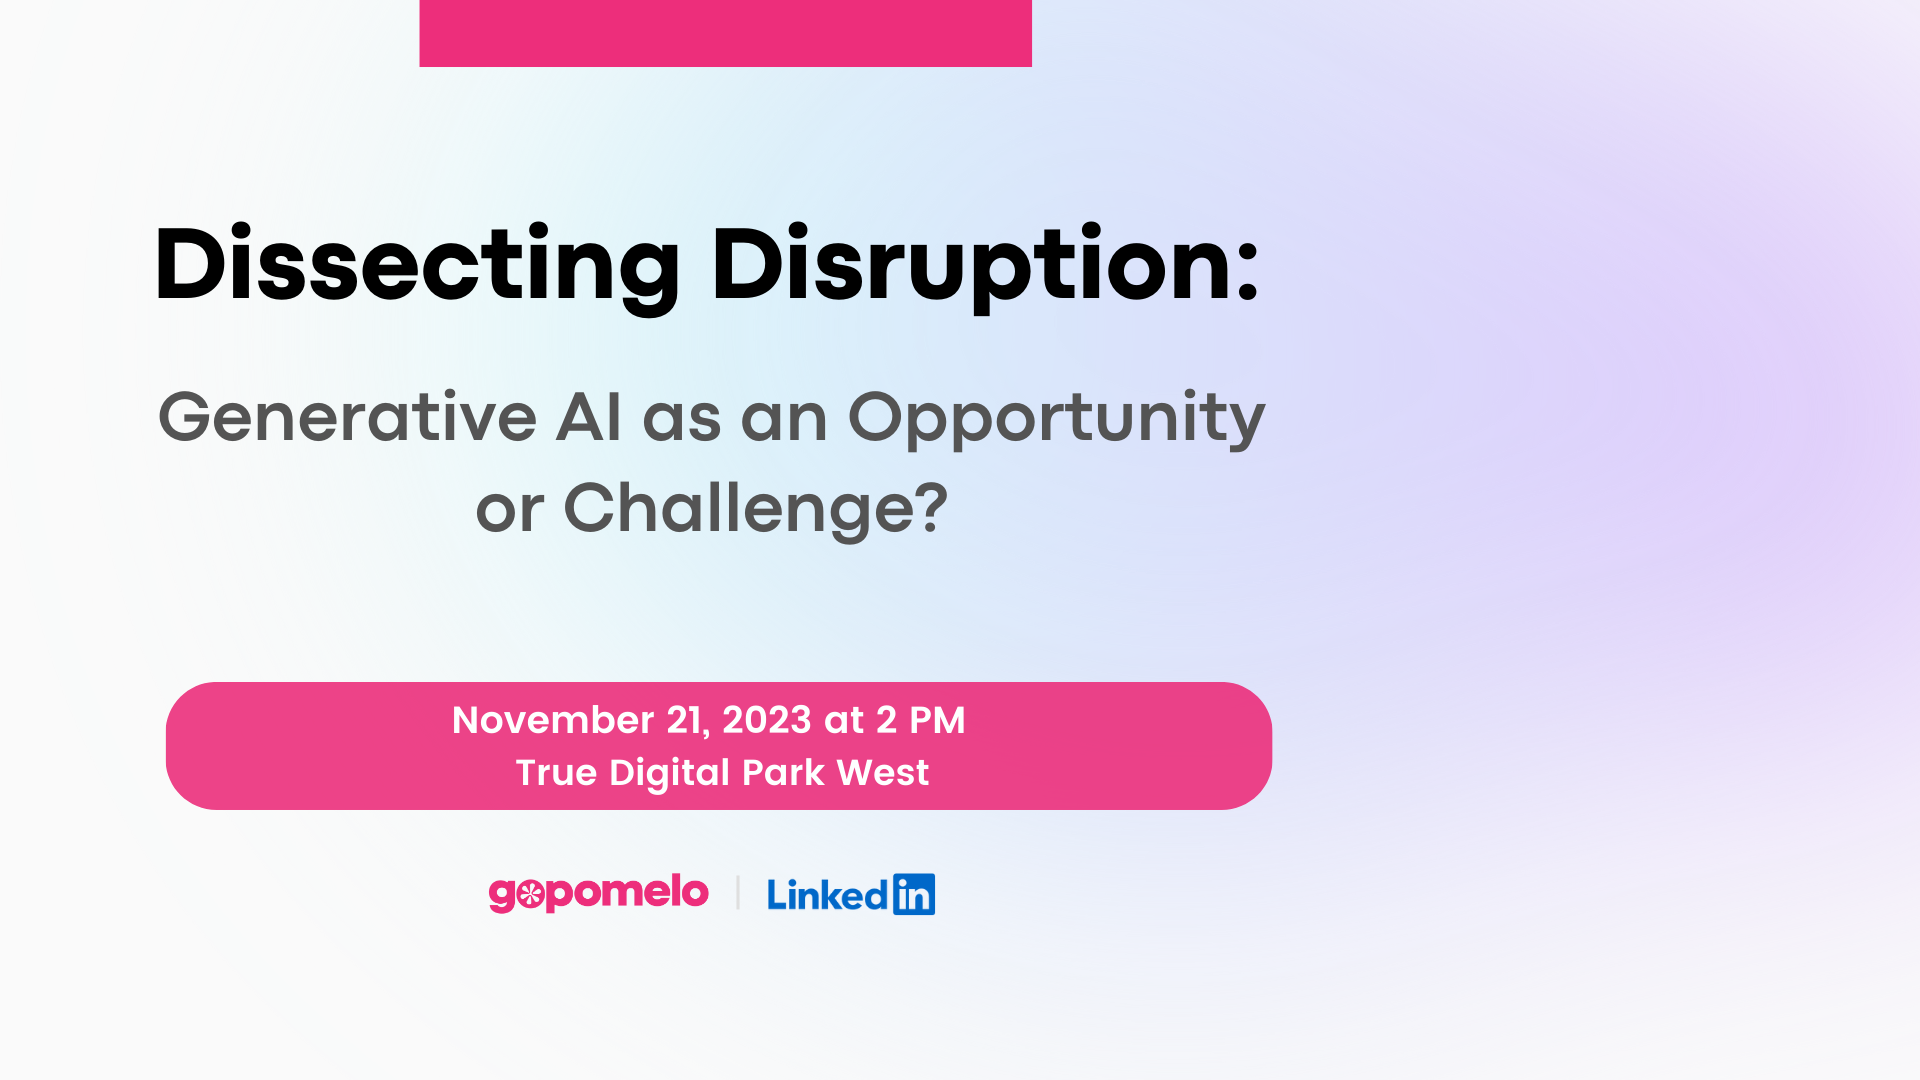 Dissecting Disruption: Generative AI as an Opportunity or Challenge?